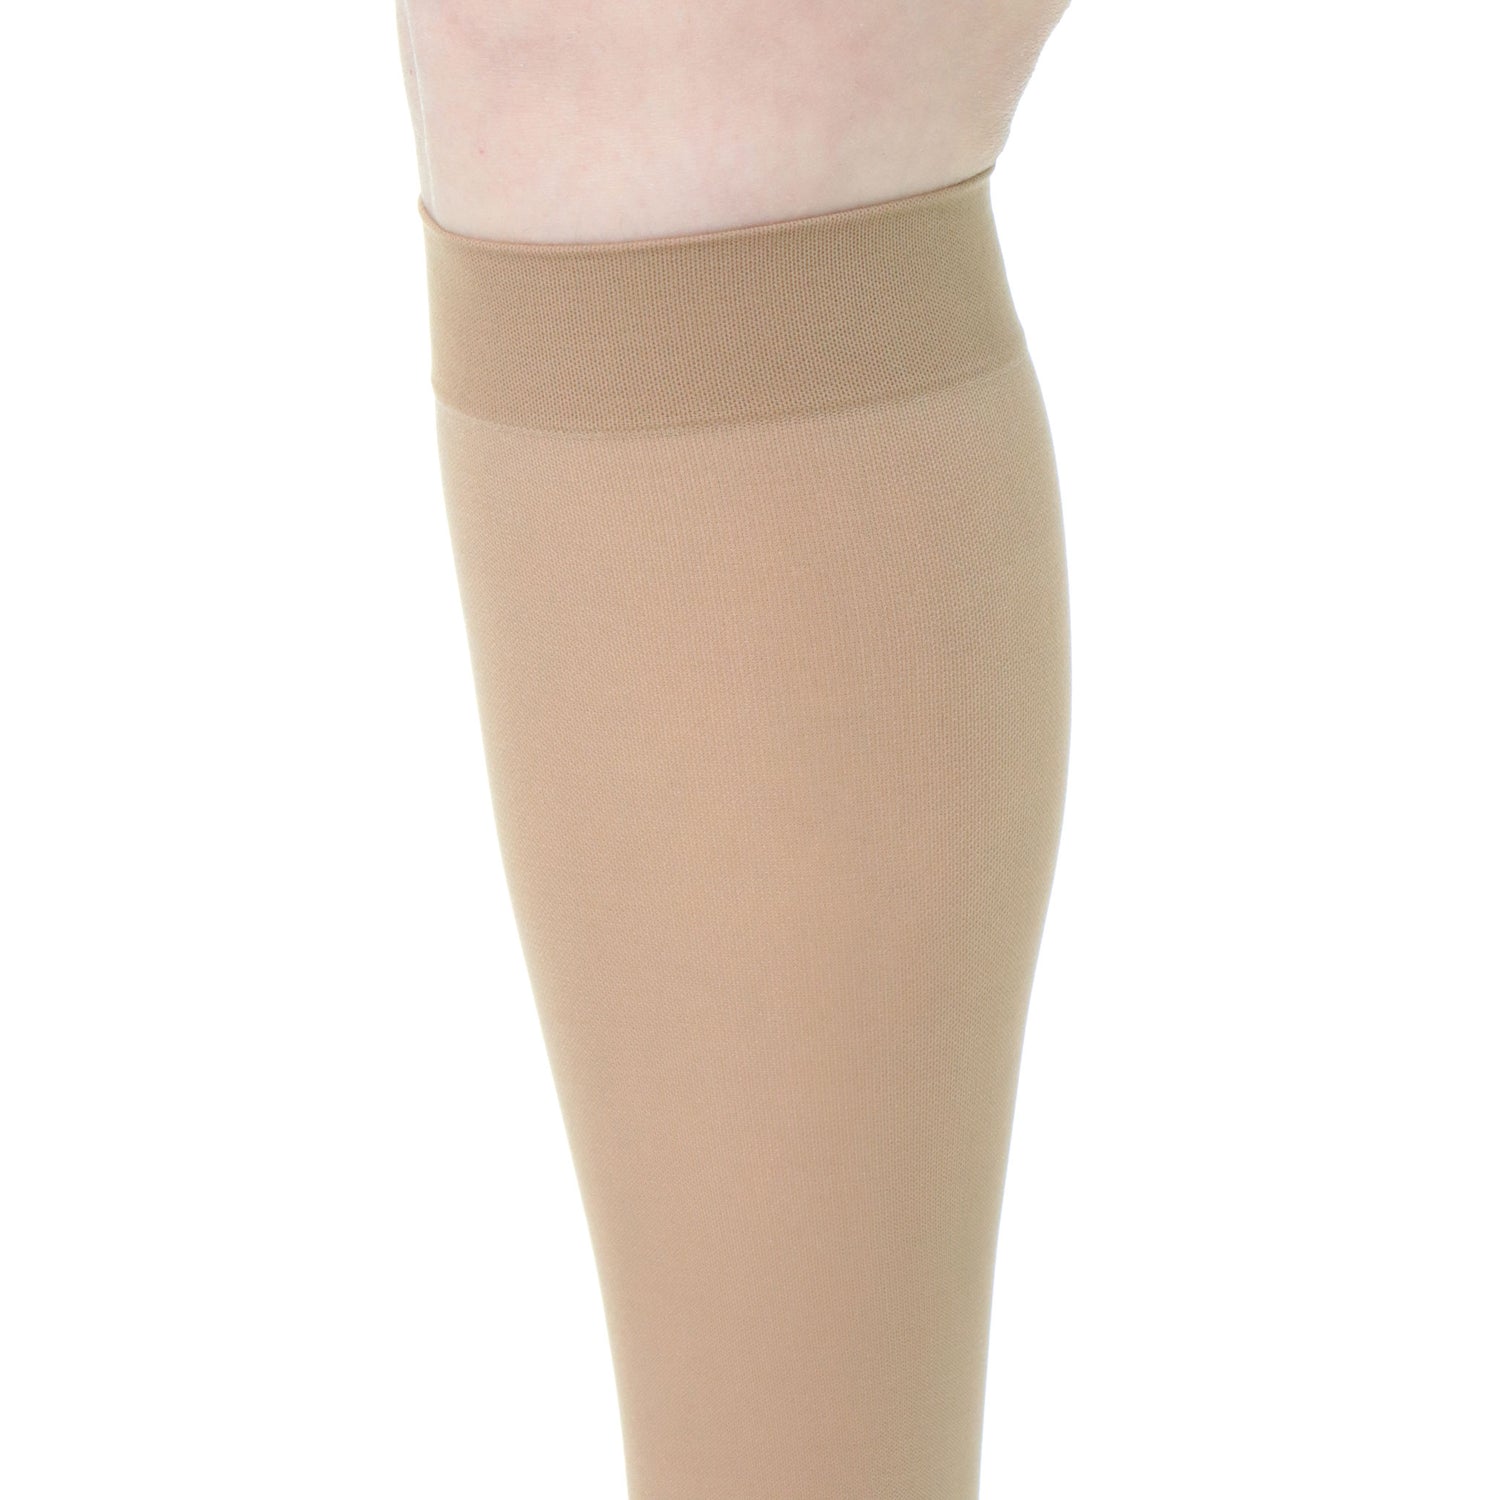 Compression Pantyhose Stockings 20-30 mmHg Medical Varicose Veins Swelling  Women